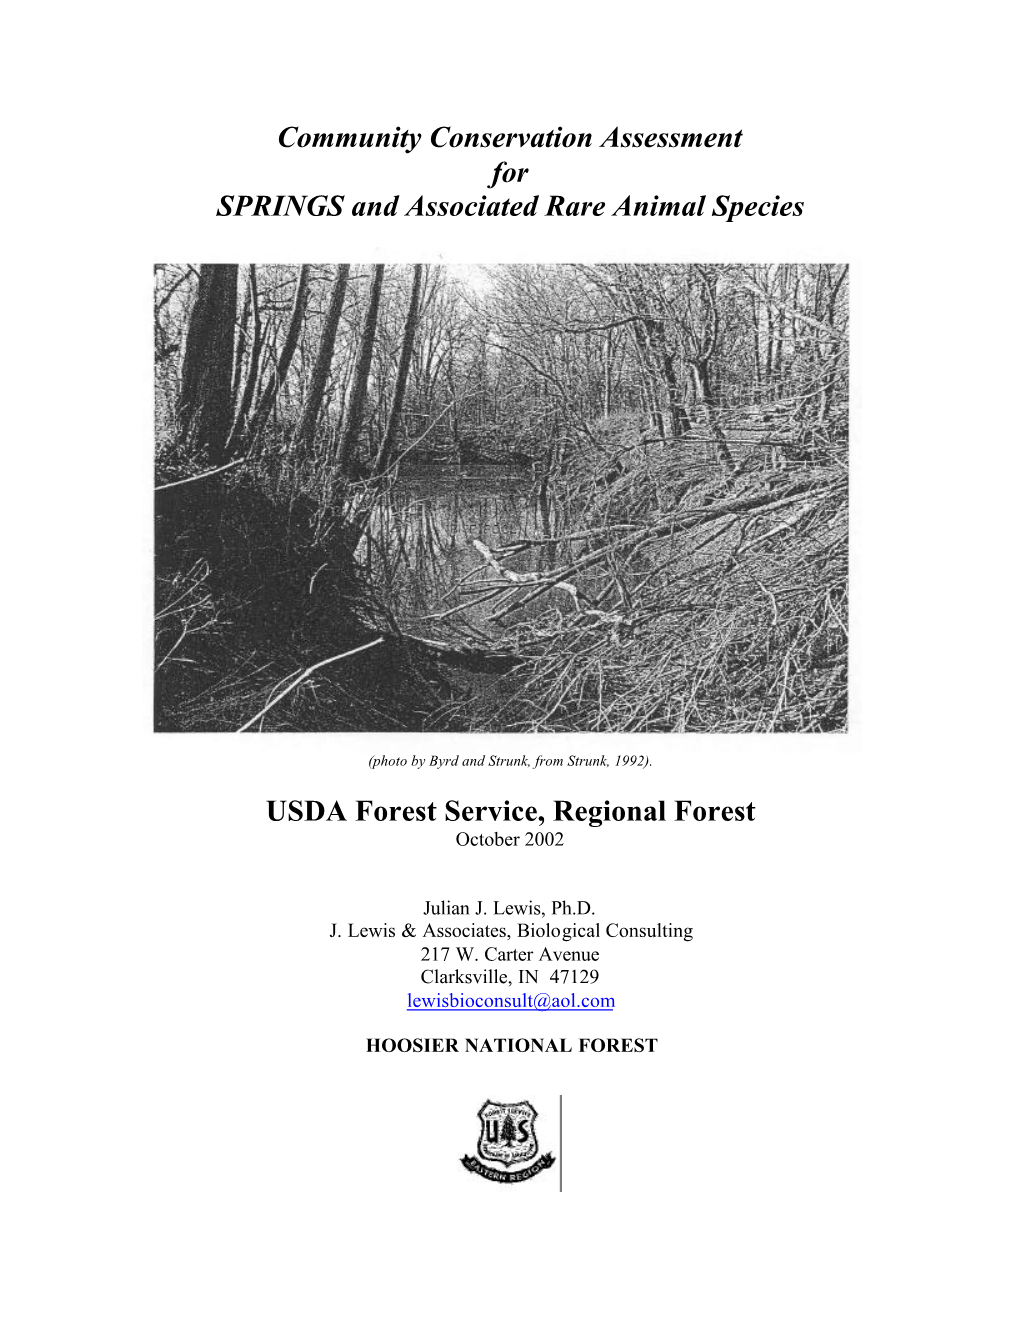 Community Conservation Assessment for SPRINGS and Associated Rare Animal Species